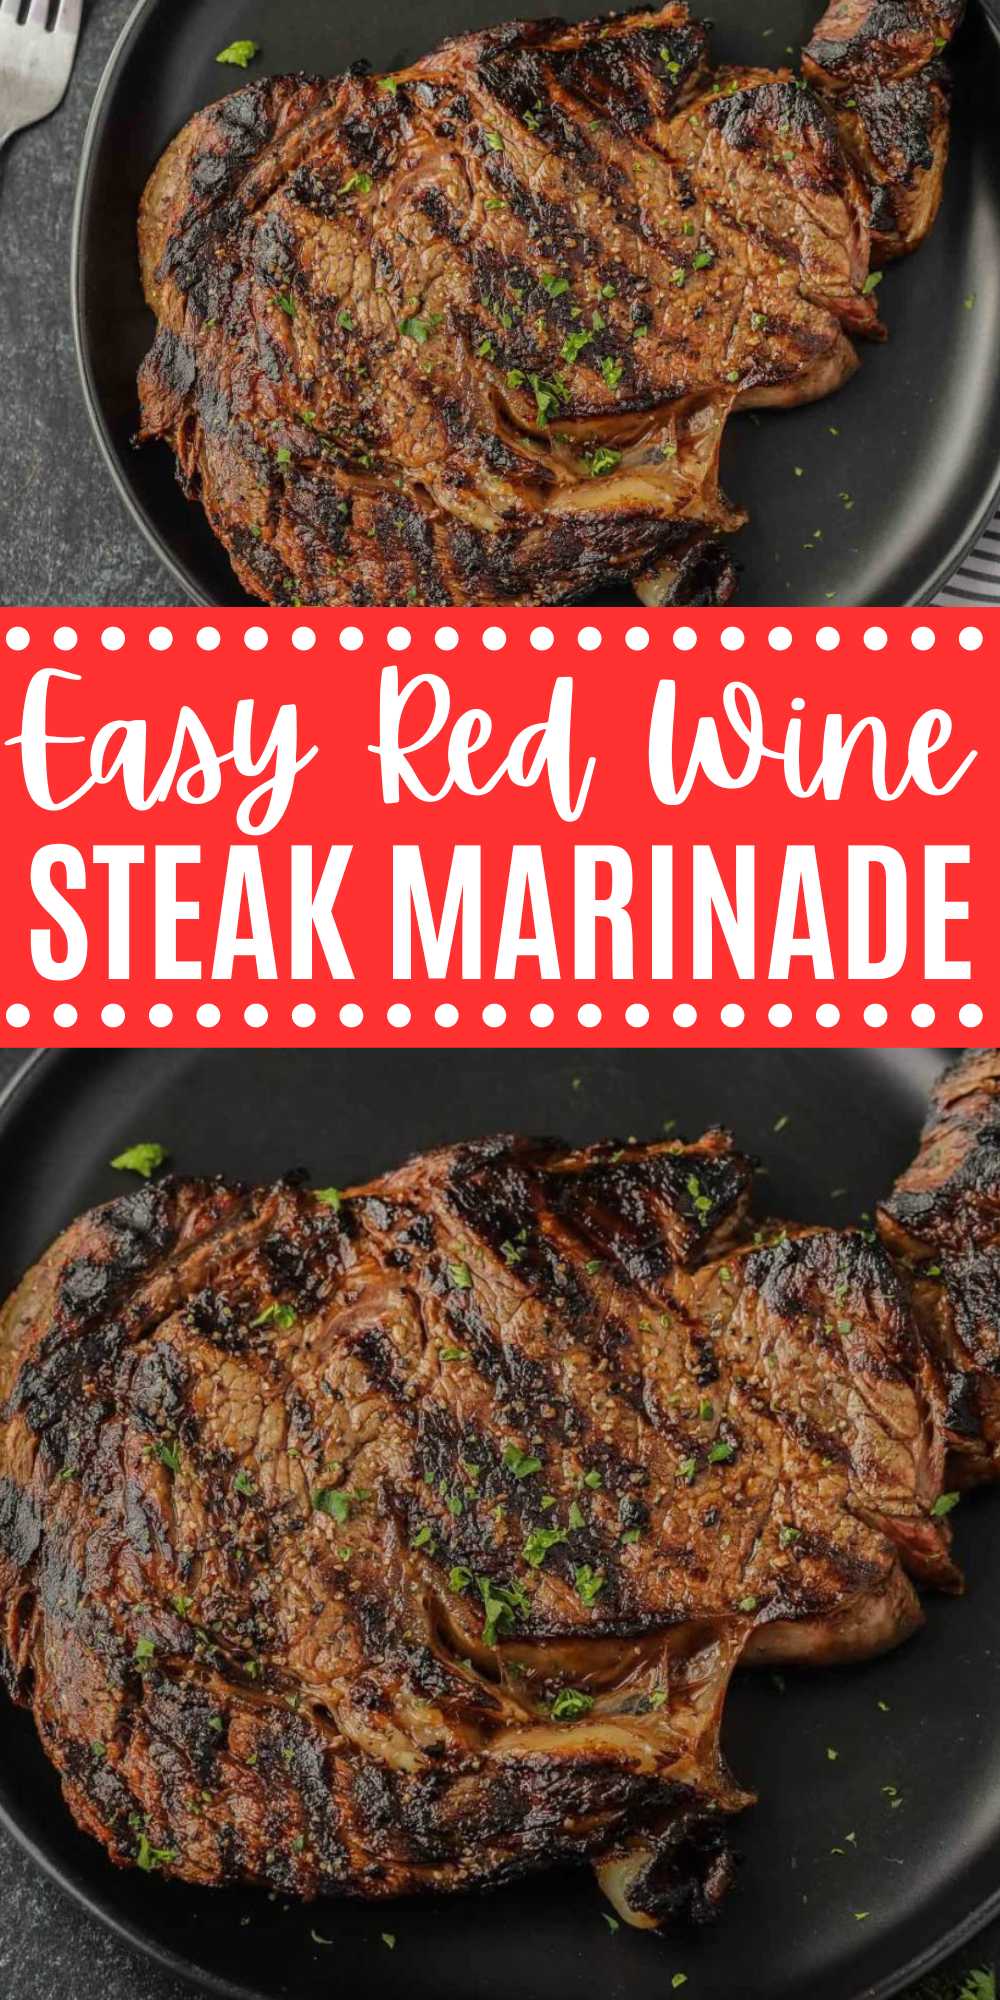 Red Wine Steak Marinade has a subtle blend of red wine and seasonings. It is perfect on steak and only requires a few ingredients. We love a juicy steak and this red wine marinade is the perfect combination. It is easy to make and results in flavorful cooked steak.  #eatingonadime #redwinesteakmarinade #steakmarinade